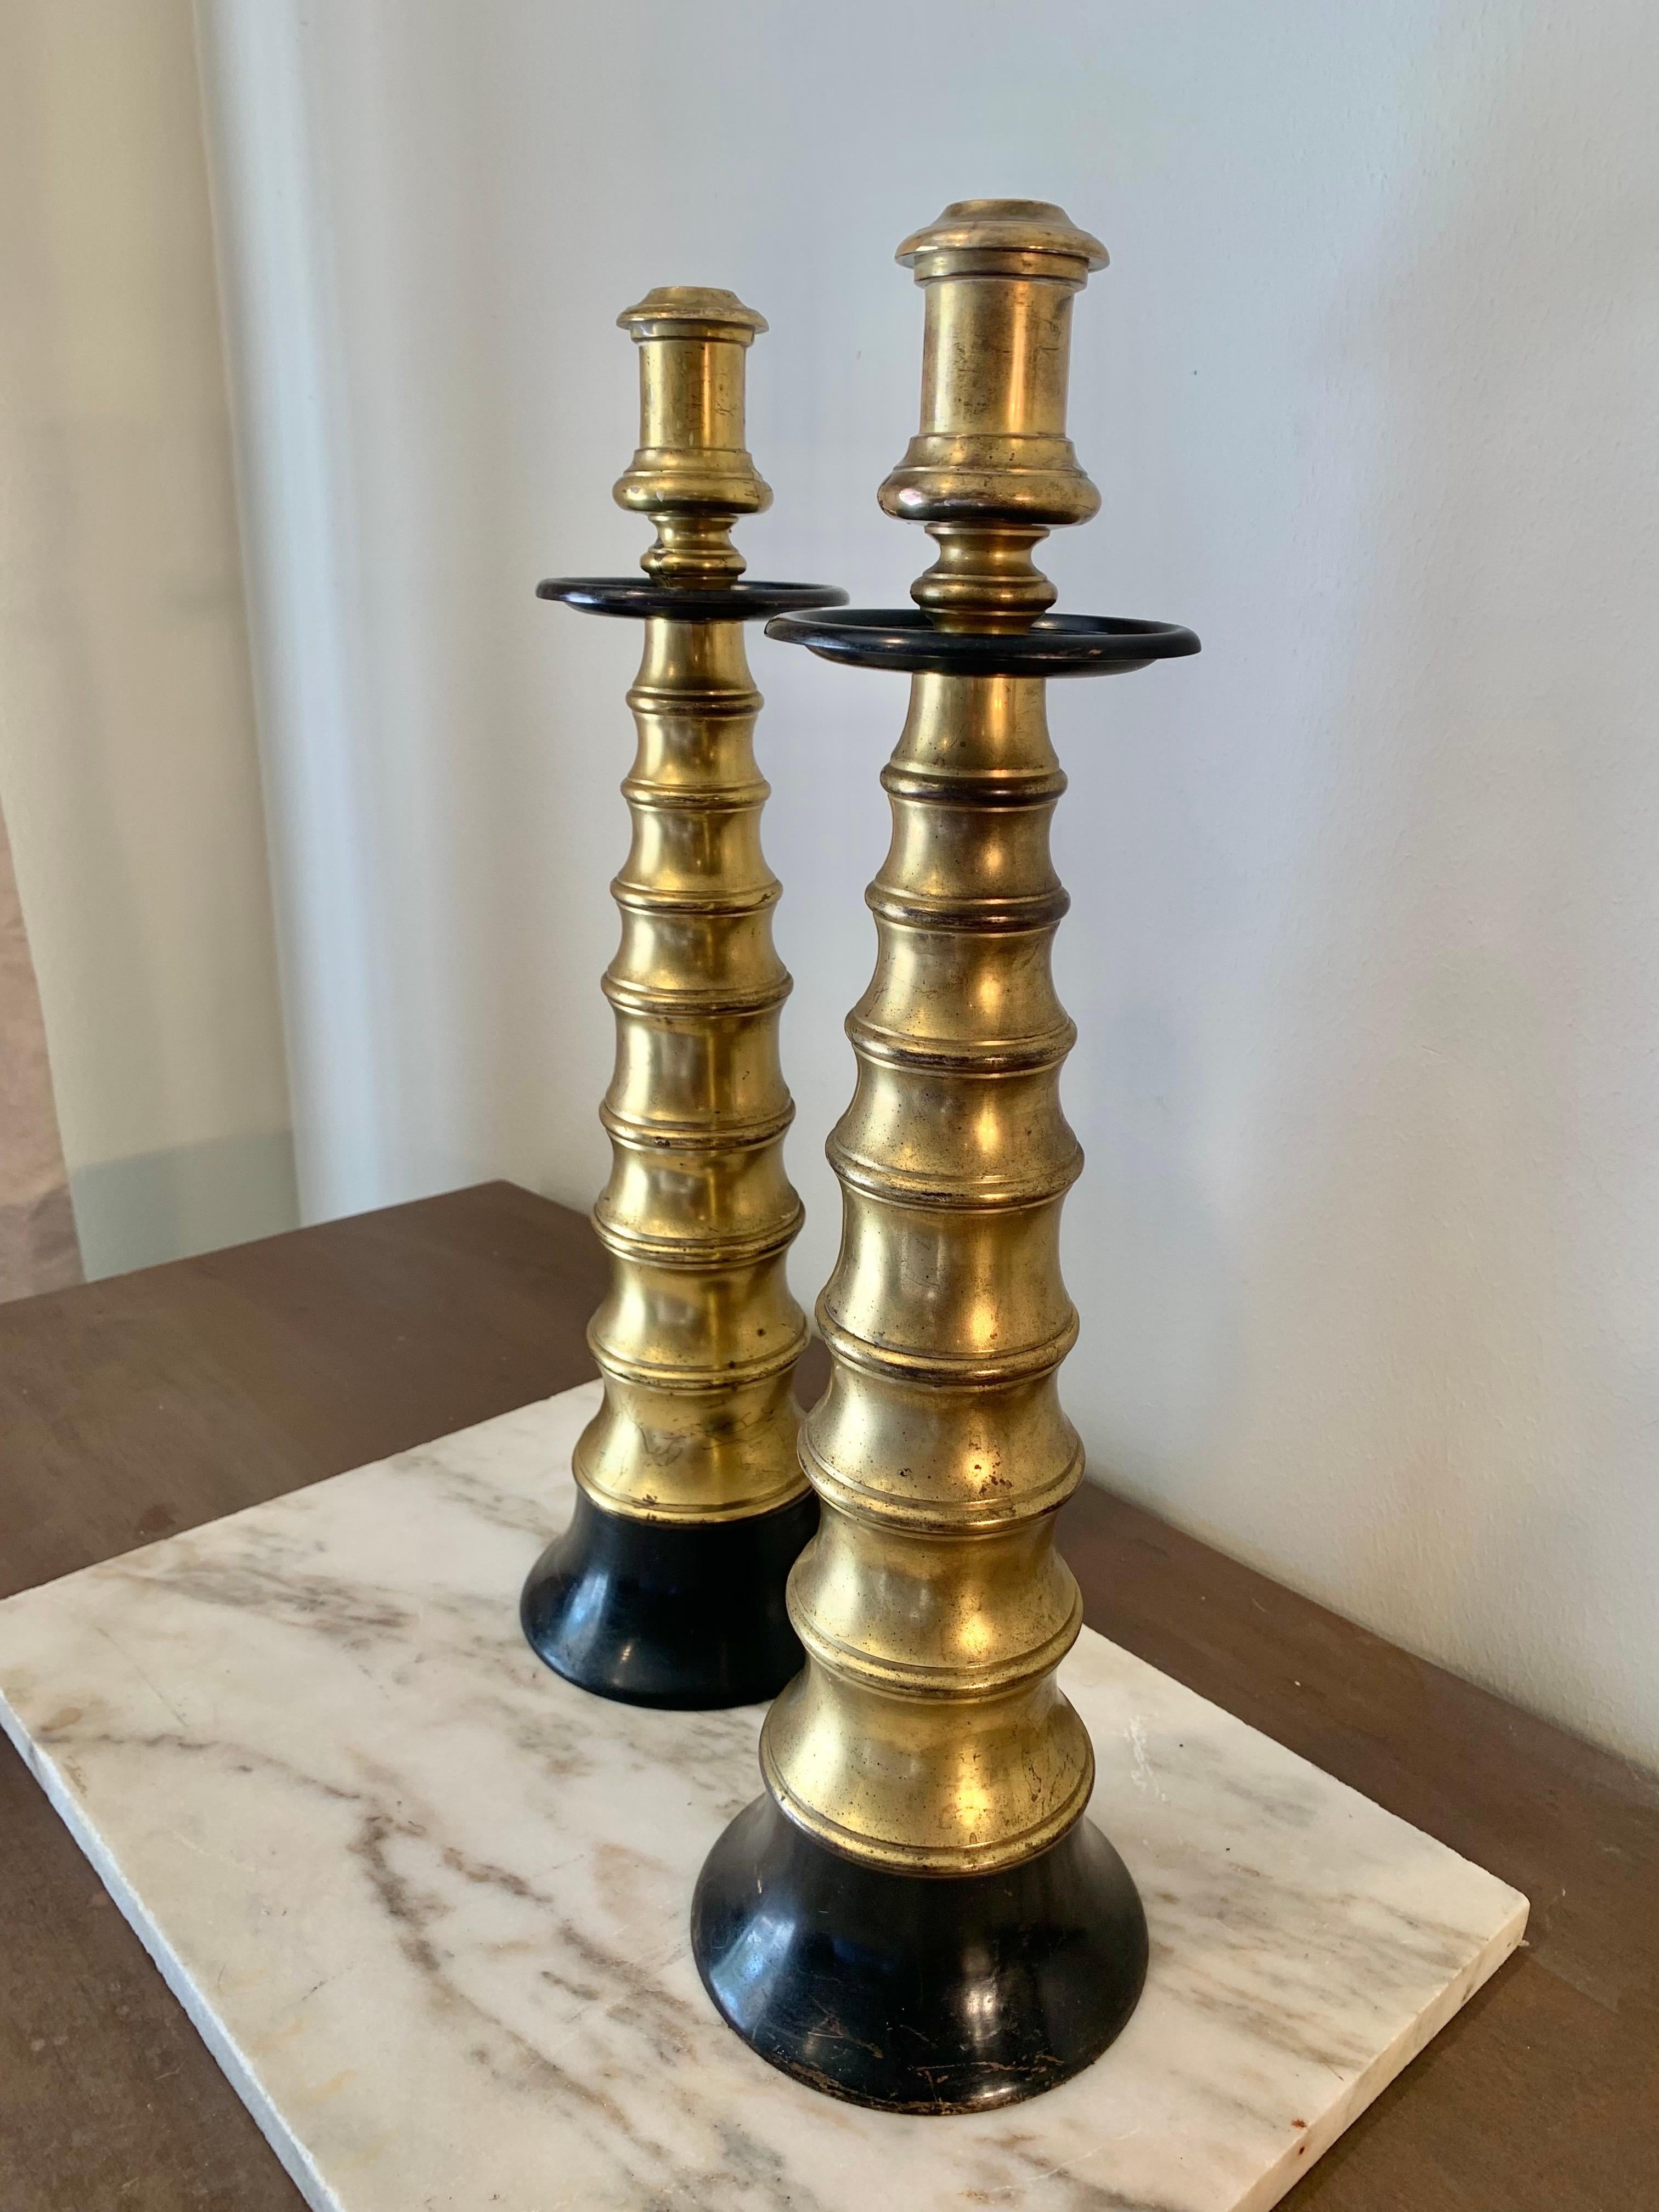 This pair of impressive Mid 20th Century Candleholders are crafted from brass in a detailed turned fashion. The wax drip catcher and round base are both ebonized to add eye catching detail to both pieces. Each candlestick is fitted to hold a